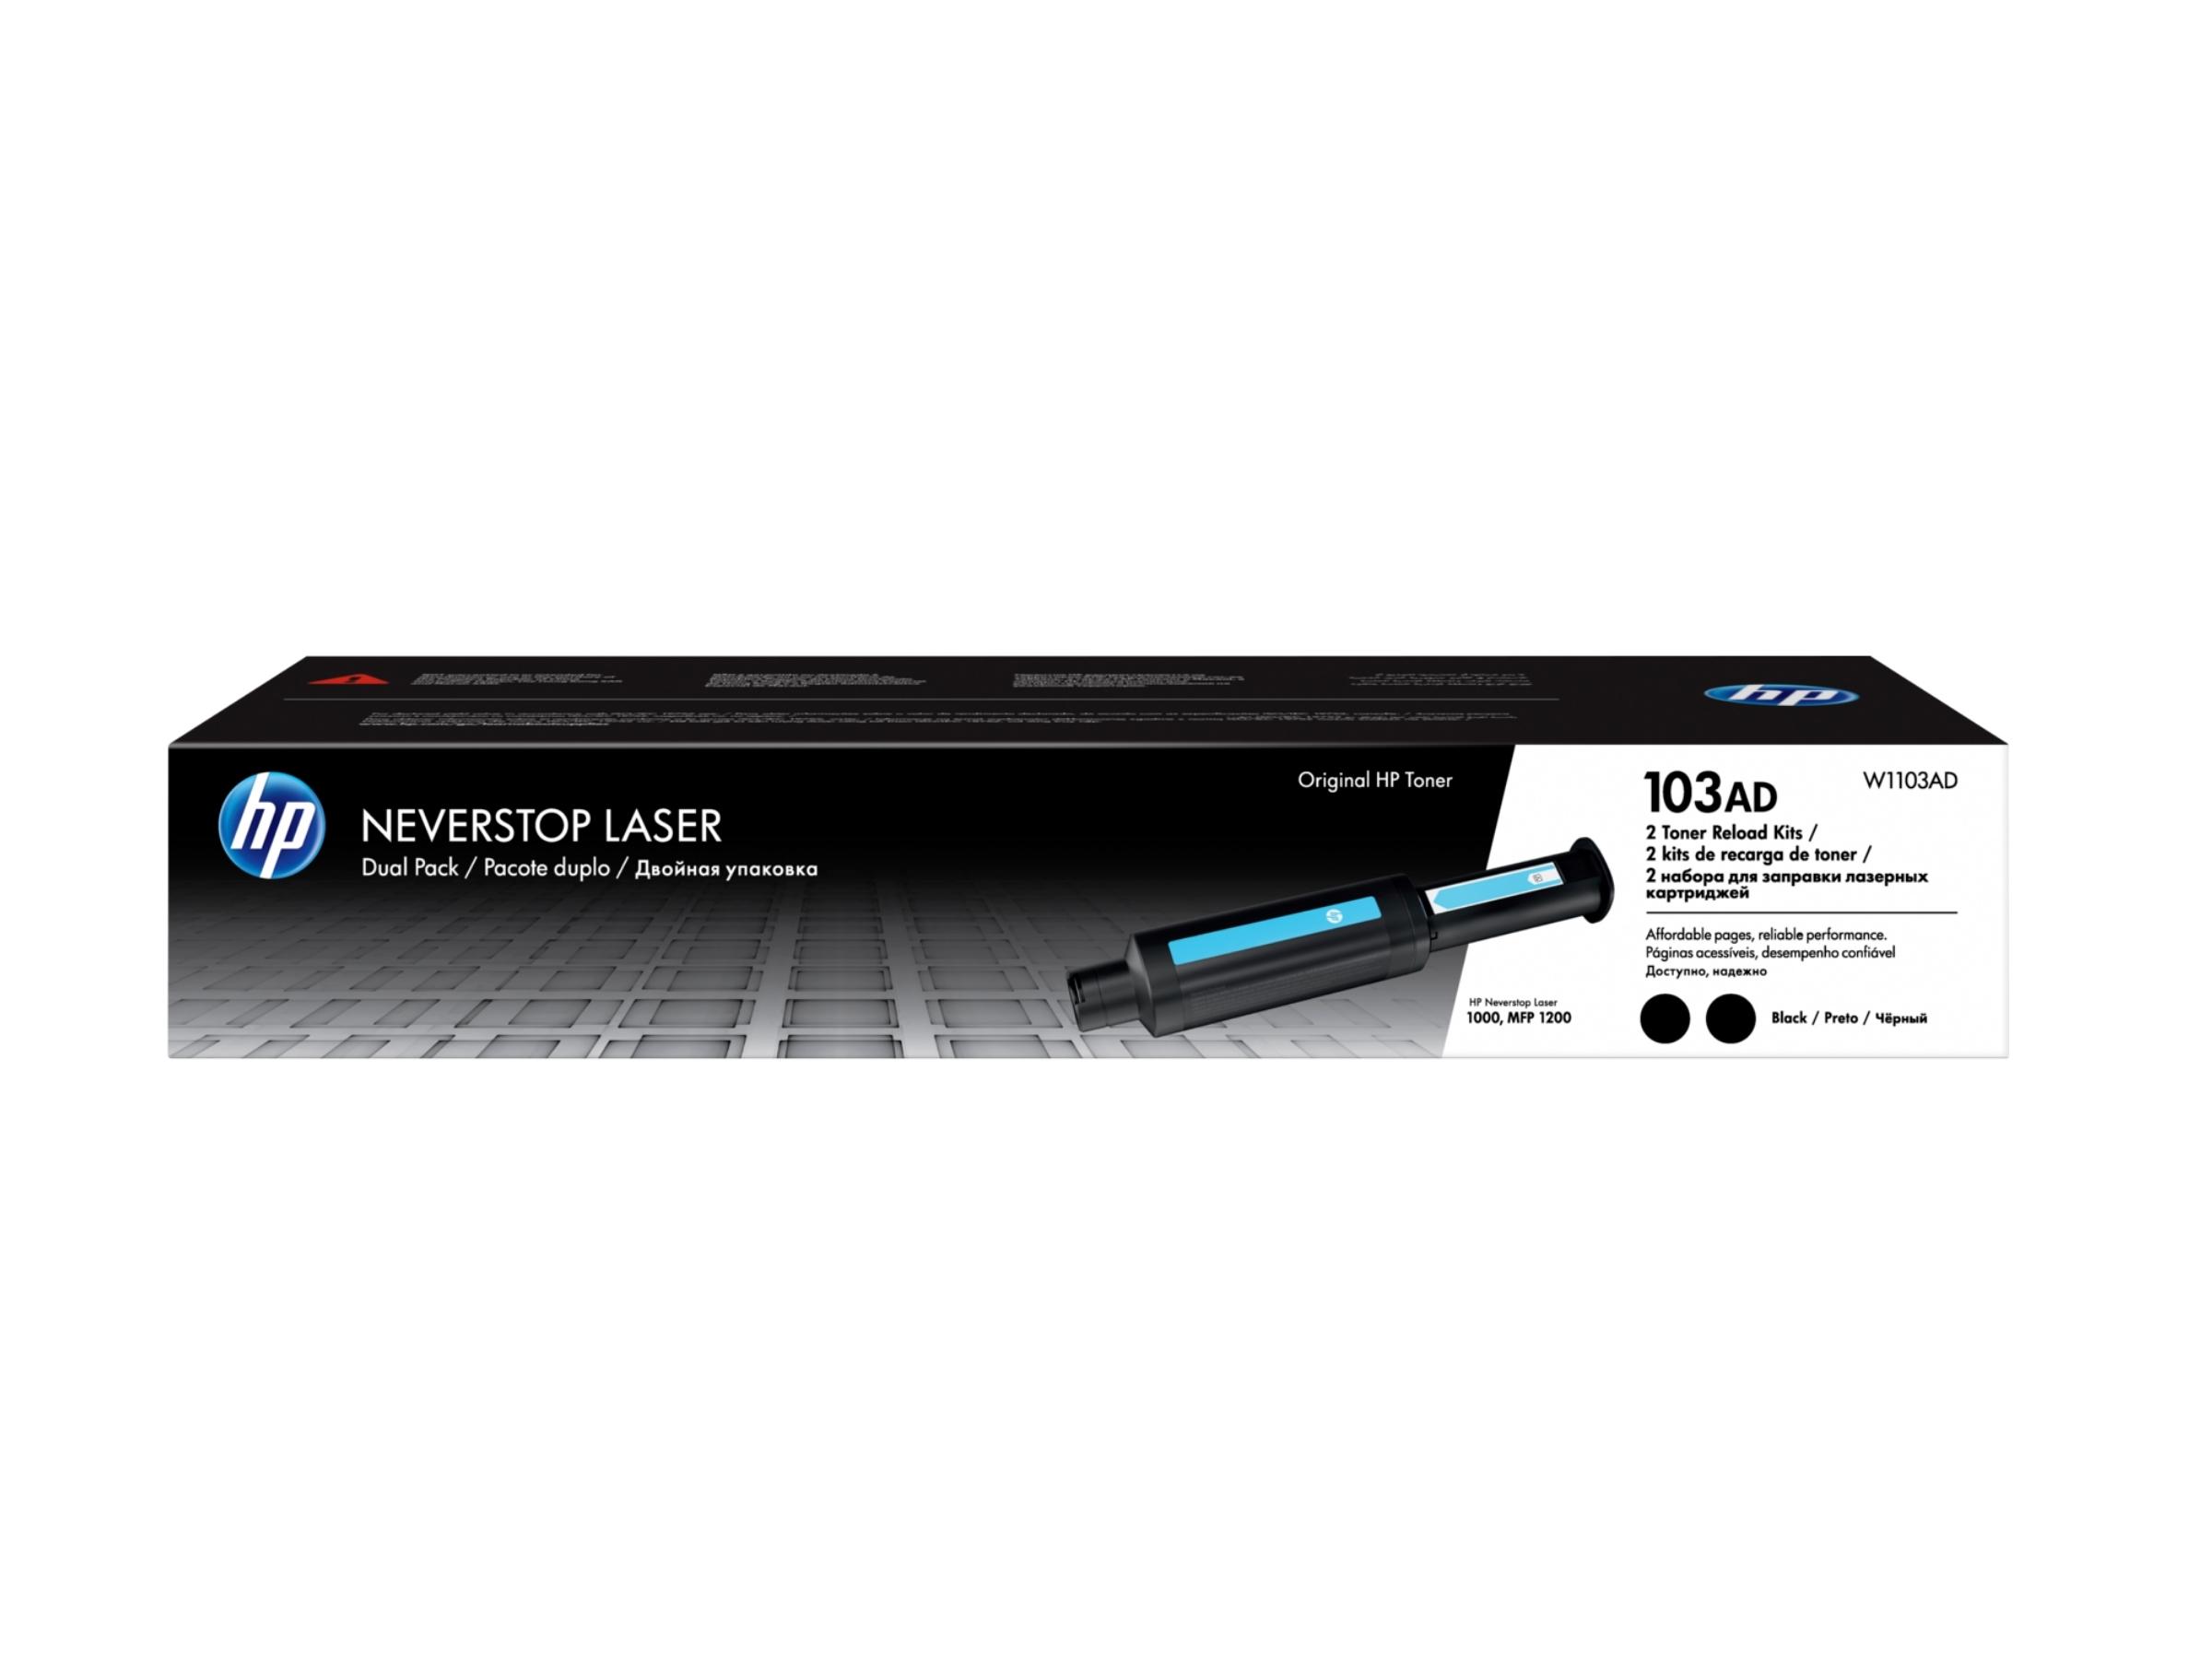 PACK X2 KIT TONER HP 103A NEGRO (W1103AD) NEVERSTOP 1000/1200 2500 PAG C/U